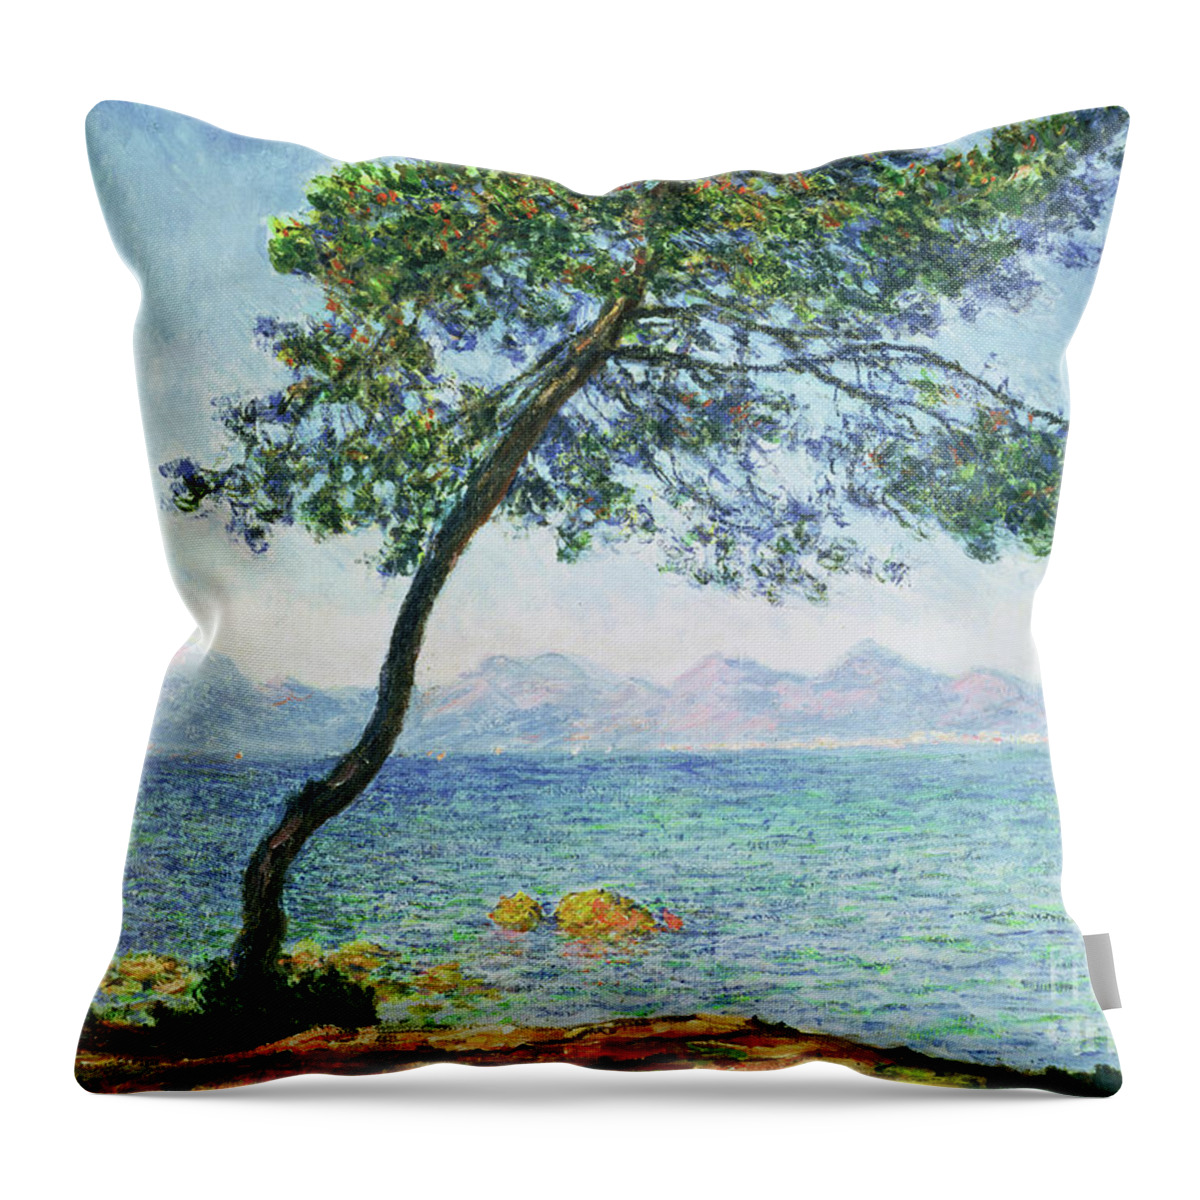 Monet Throw Pillow featuring the painting Antibes by Claude Monet